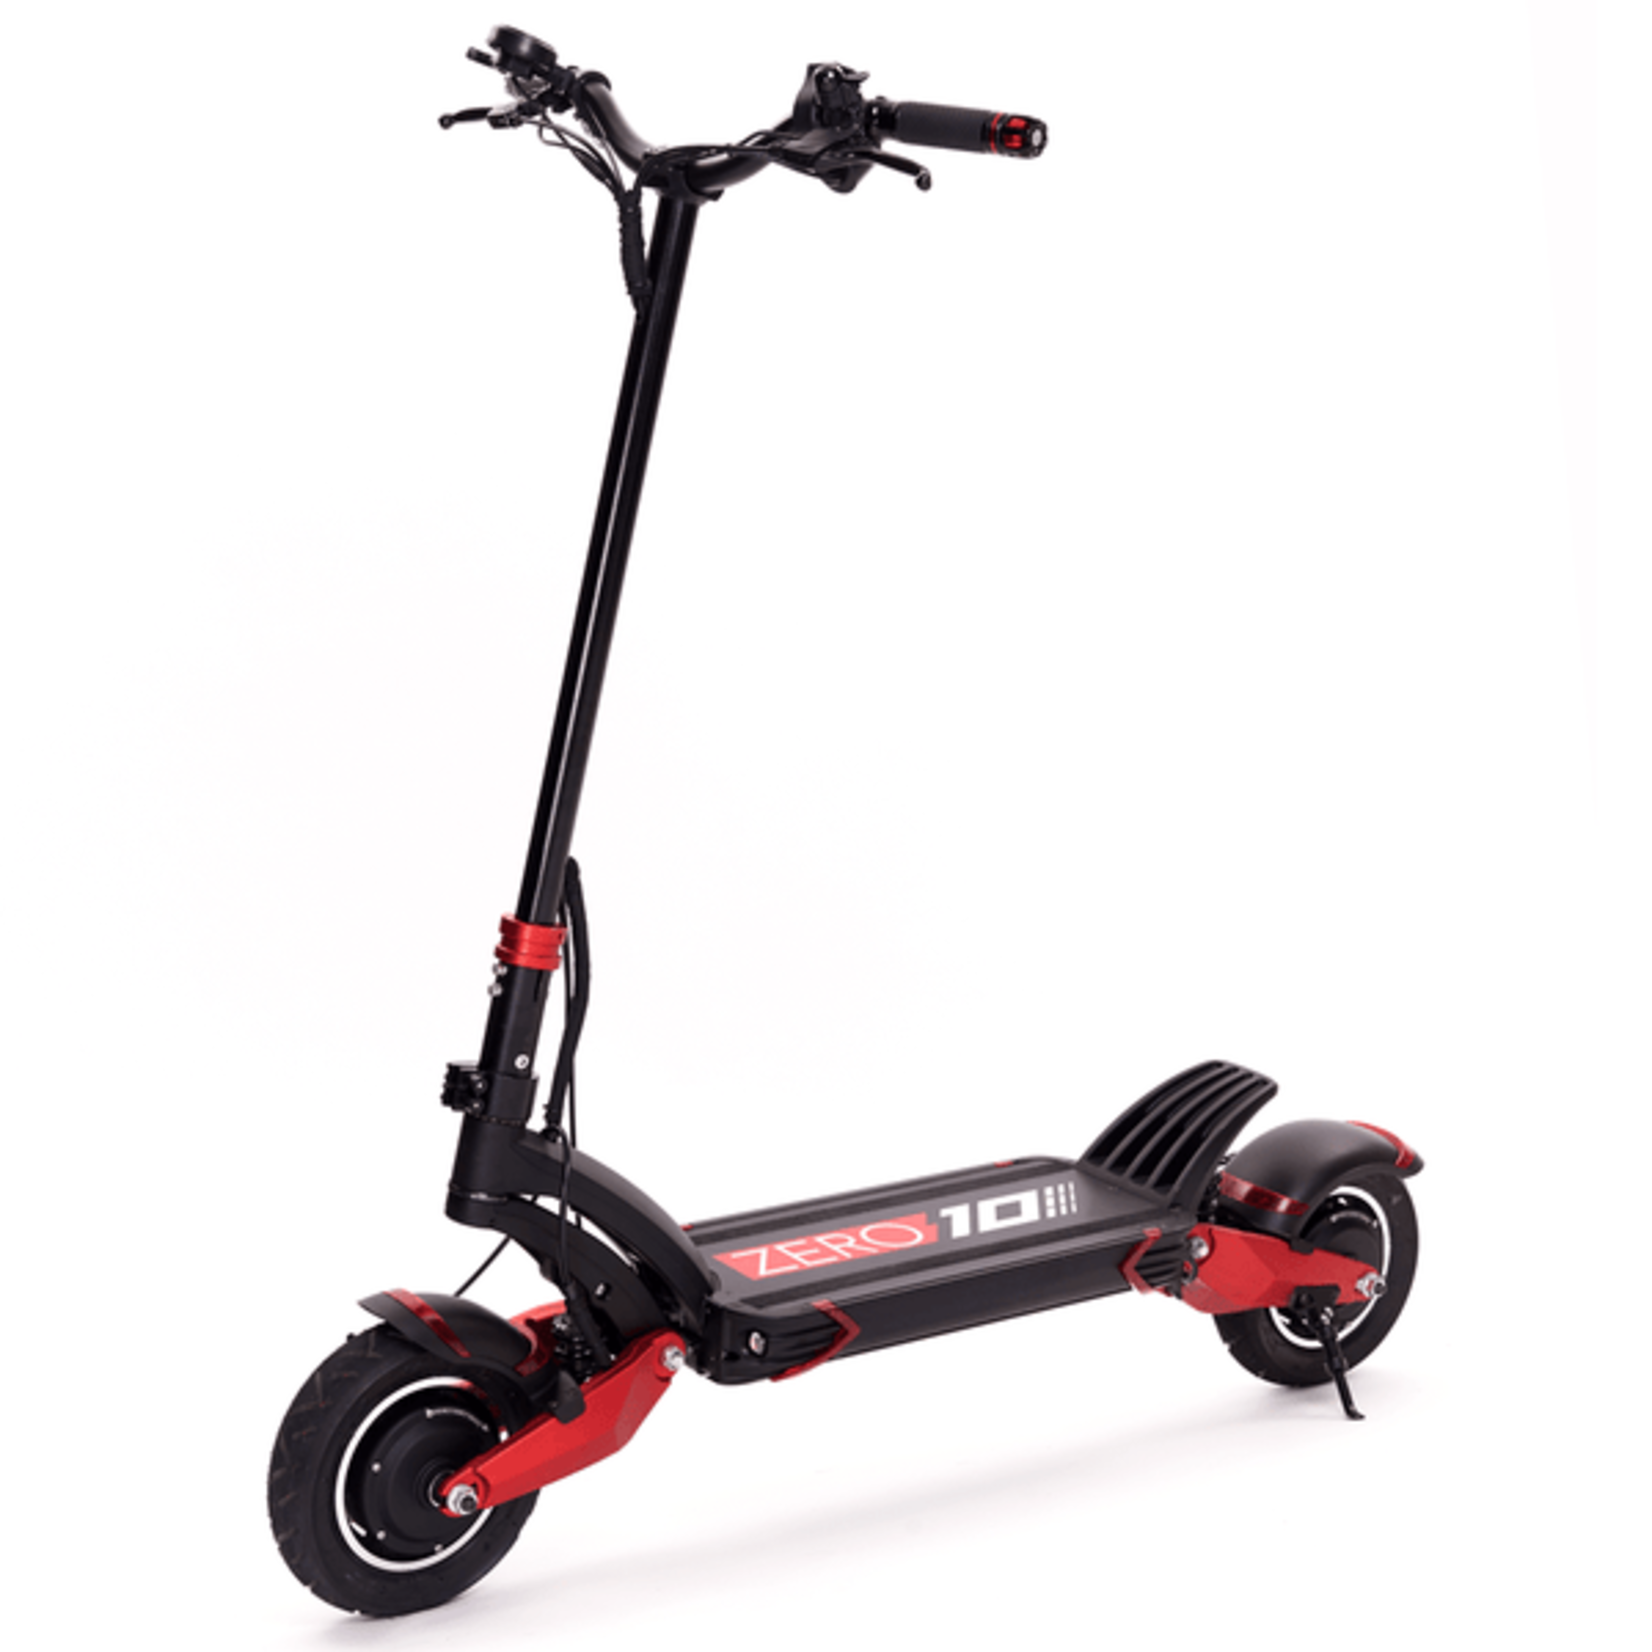 SmartMotion Electric Scooter ZERO 10X